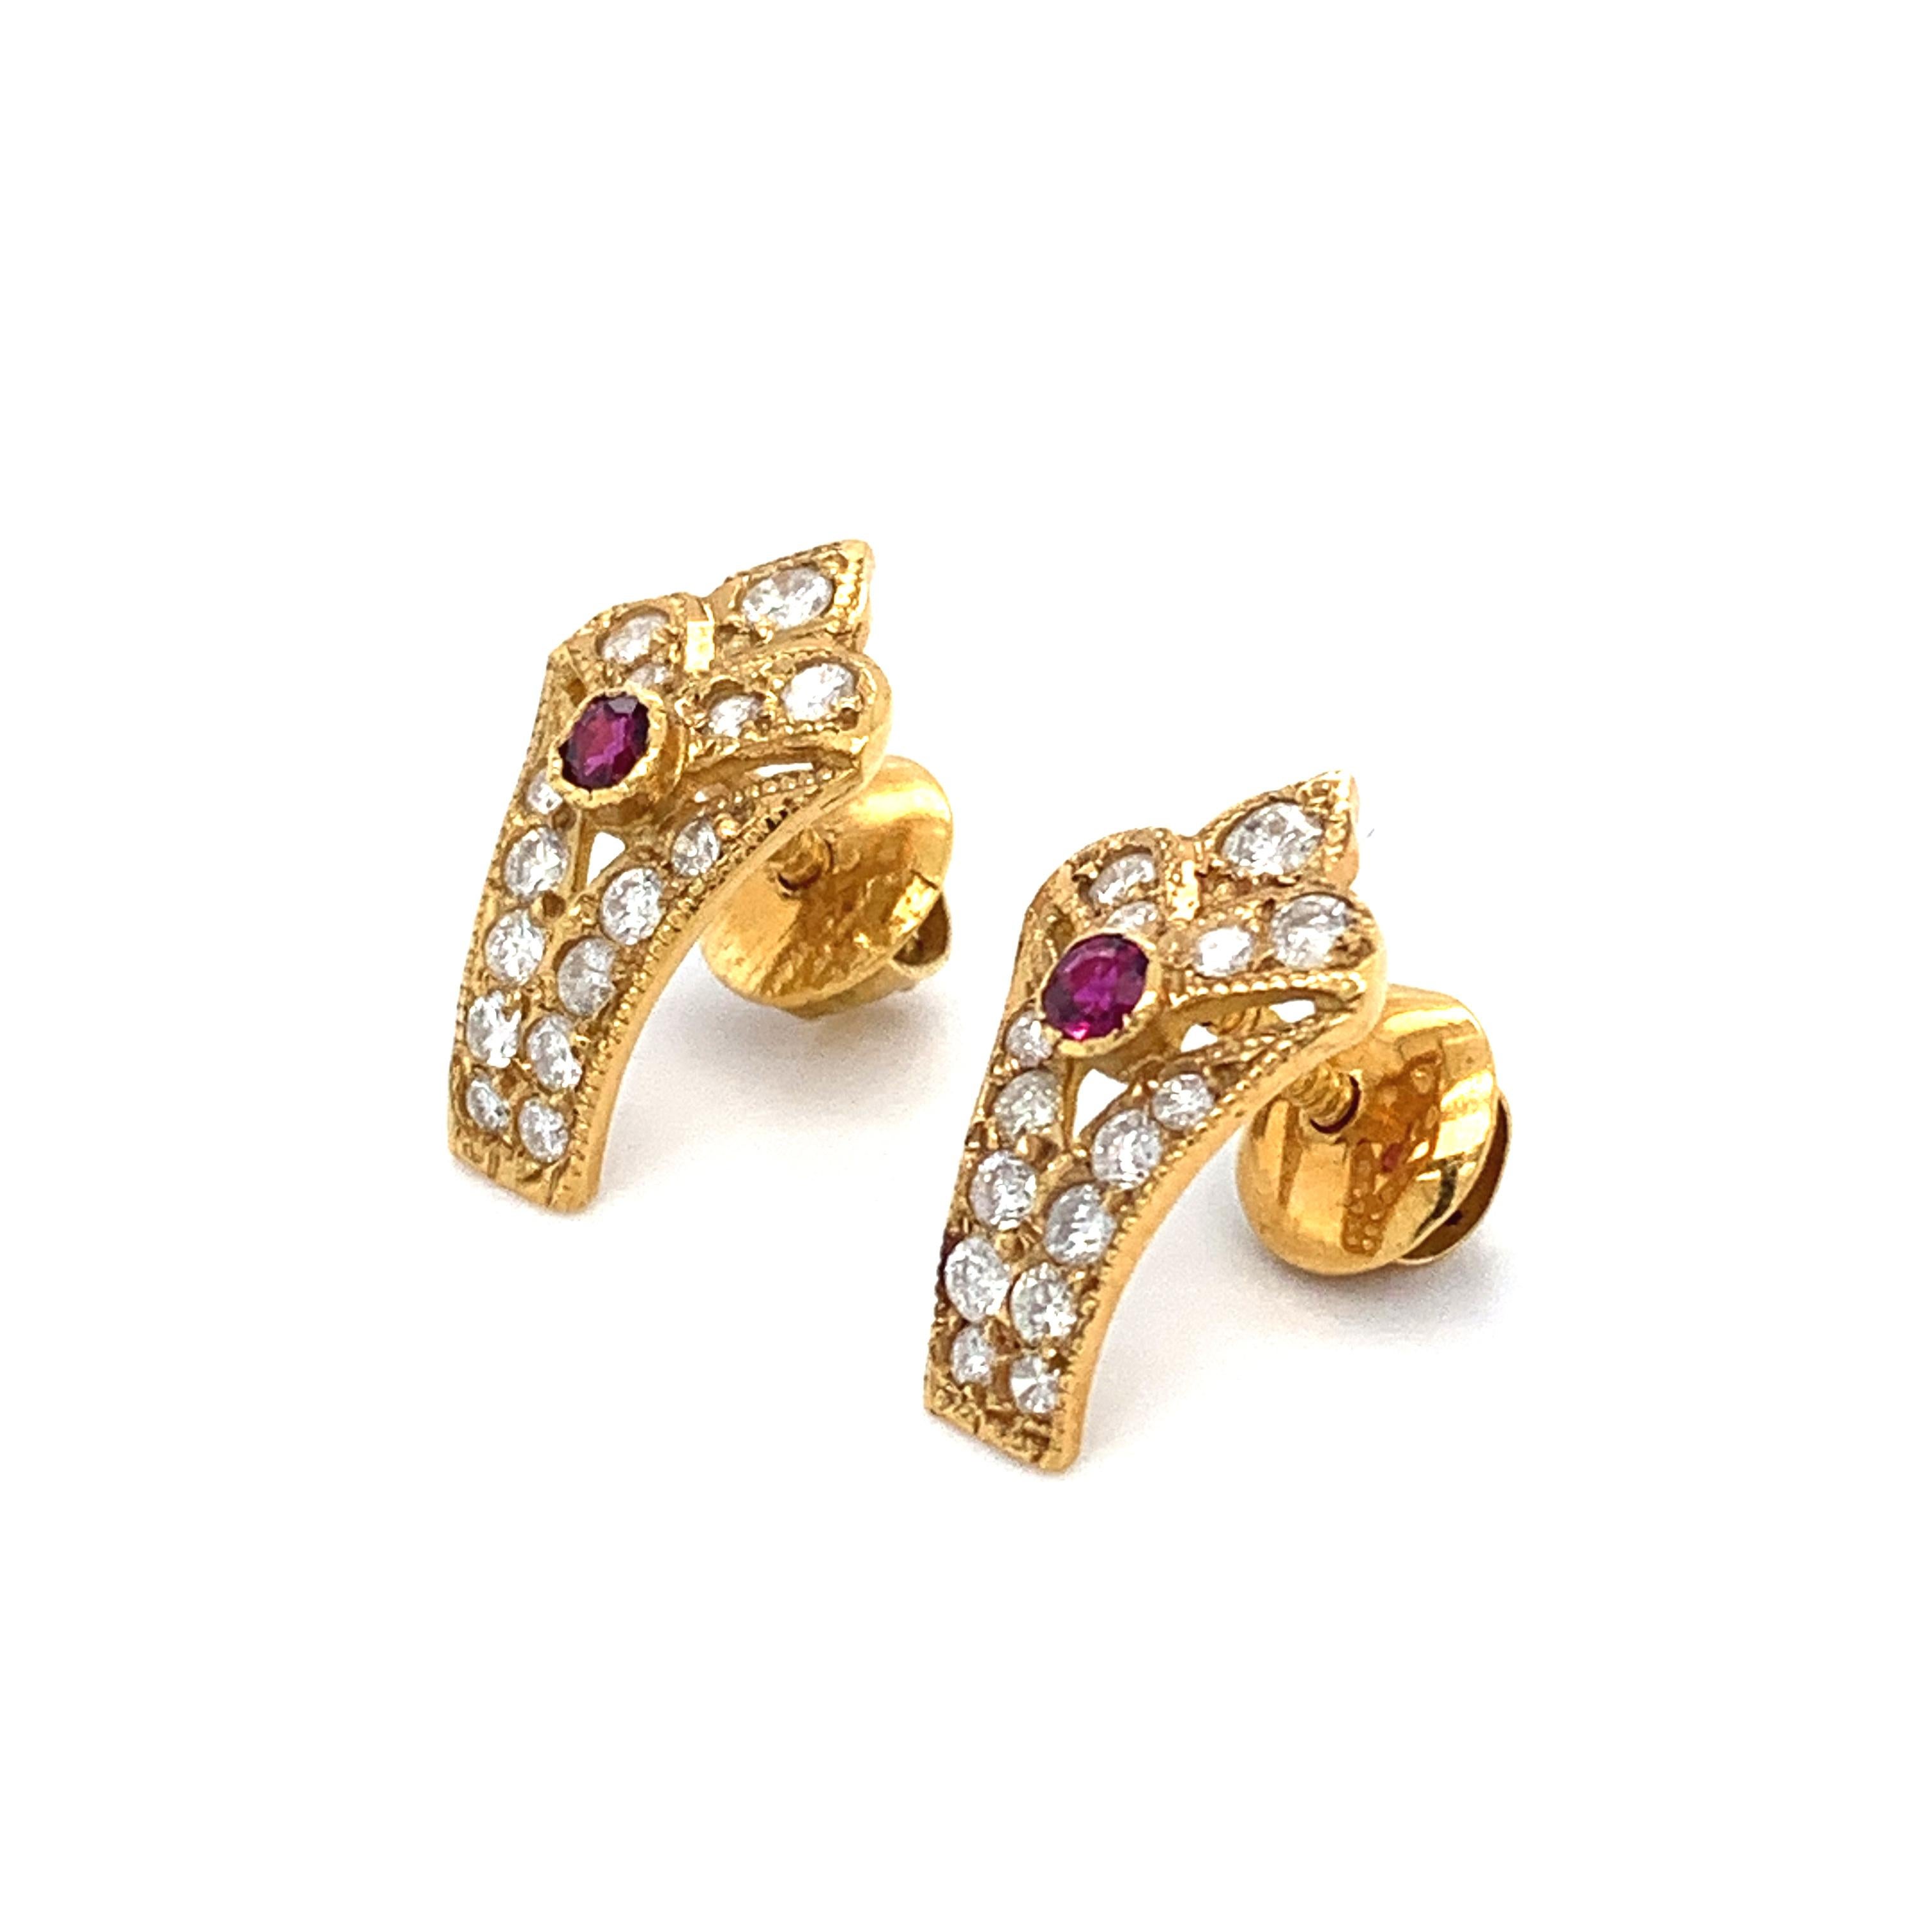 Ruby diamonds art deco studs earrings 18k yellow gold In New Condition For Sale In London, GB